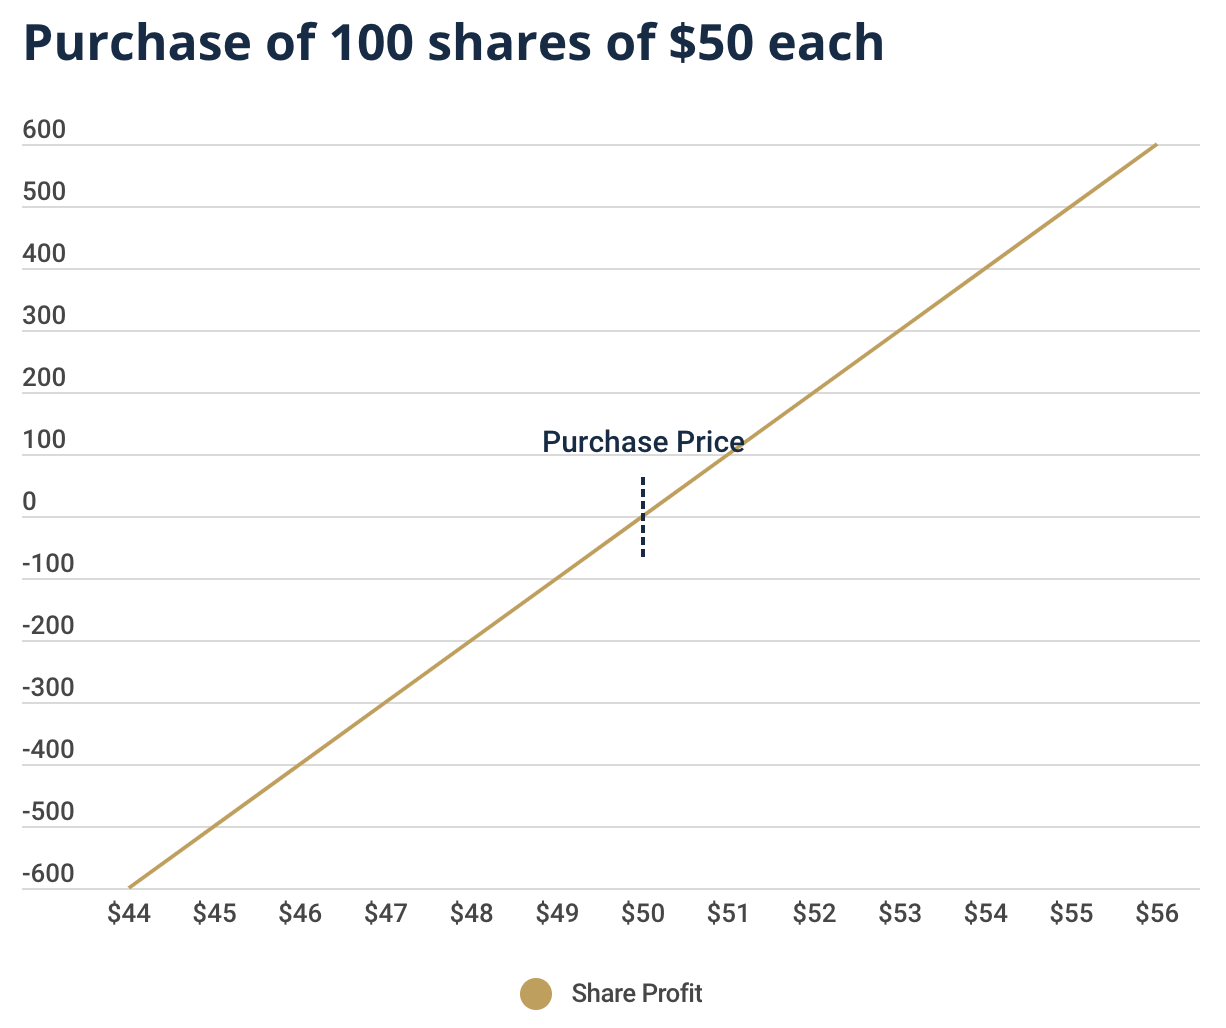 Chart showing the profit or loss in contrast to a long position with a purchase in the spot market depending on the price. If you buy 100 shares at a price of $50, then you have already made a profit of $100 with a share price of $51. However, the price can also go down and with every $1 a loss of $100 is made.